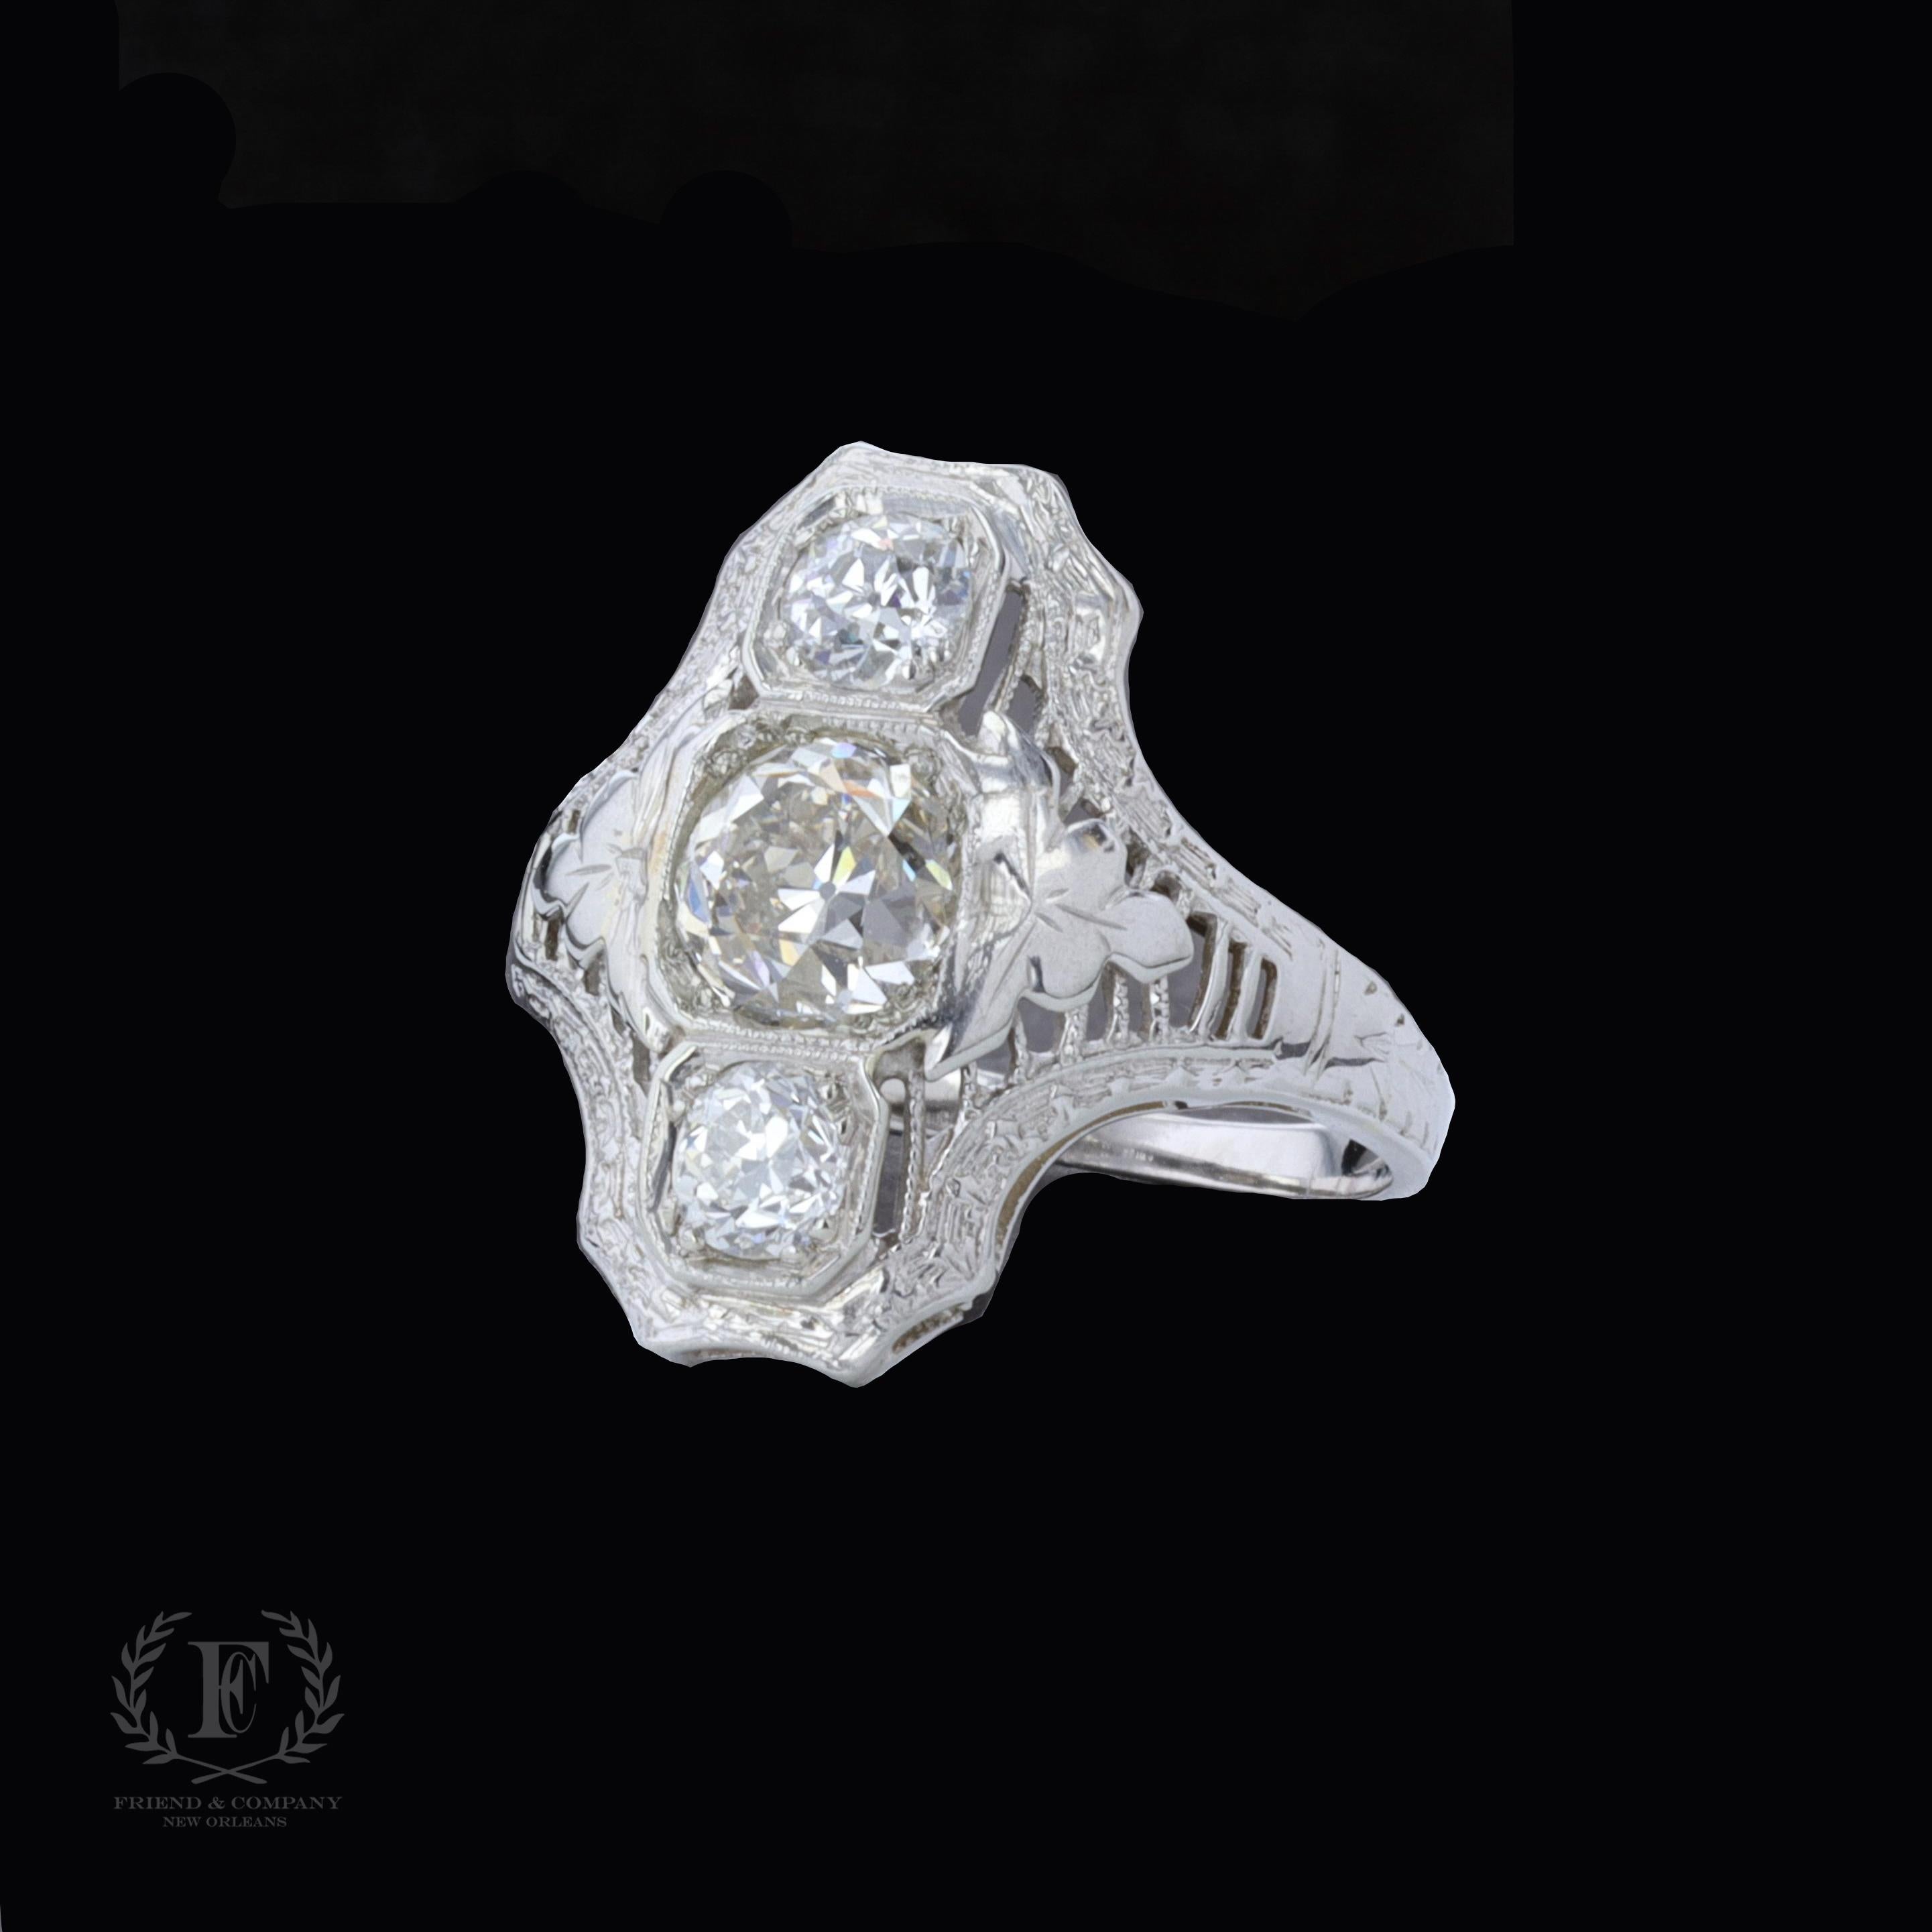 This decadent 14 karat Art Deco ring is centered with an old mine cut diamond that weighs approximately 1.03 carats. The color of the diamond is I-J with VS clarity. The center stone is accentuated by two old mine cut diamonds that weigh